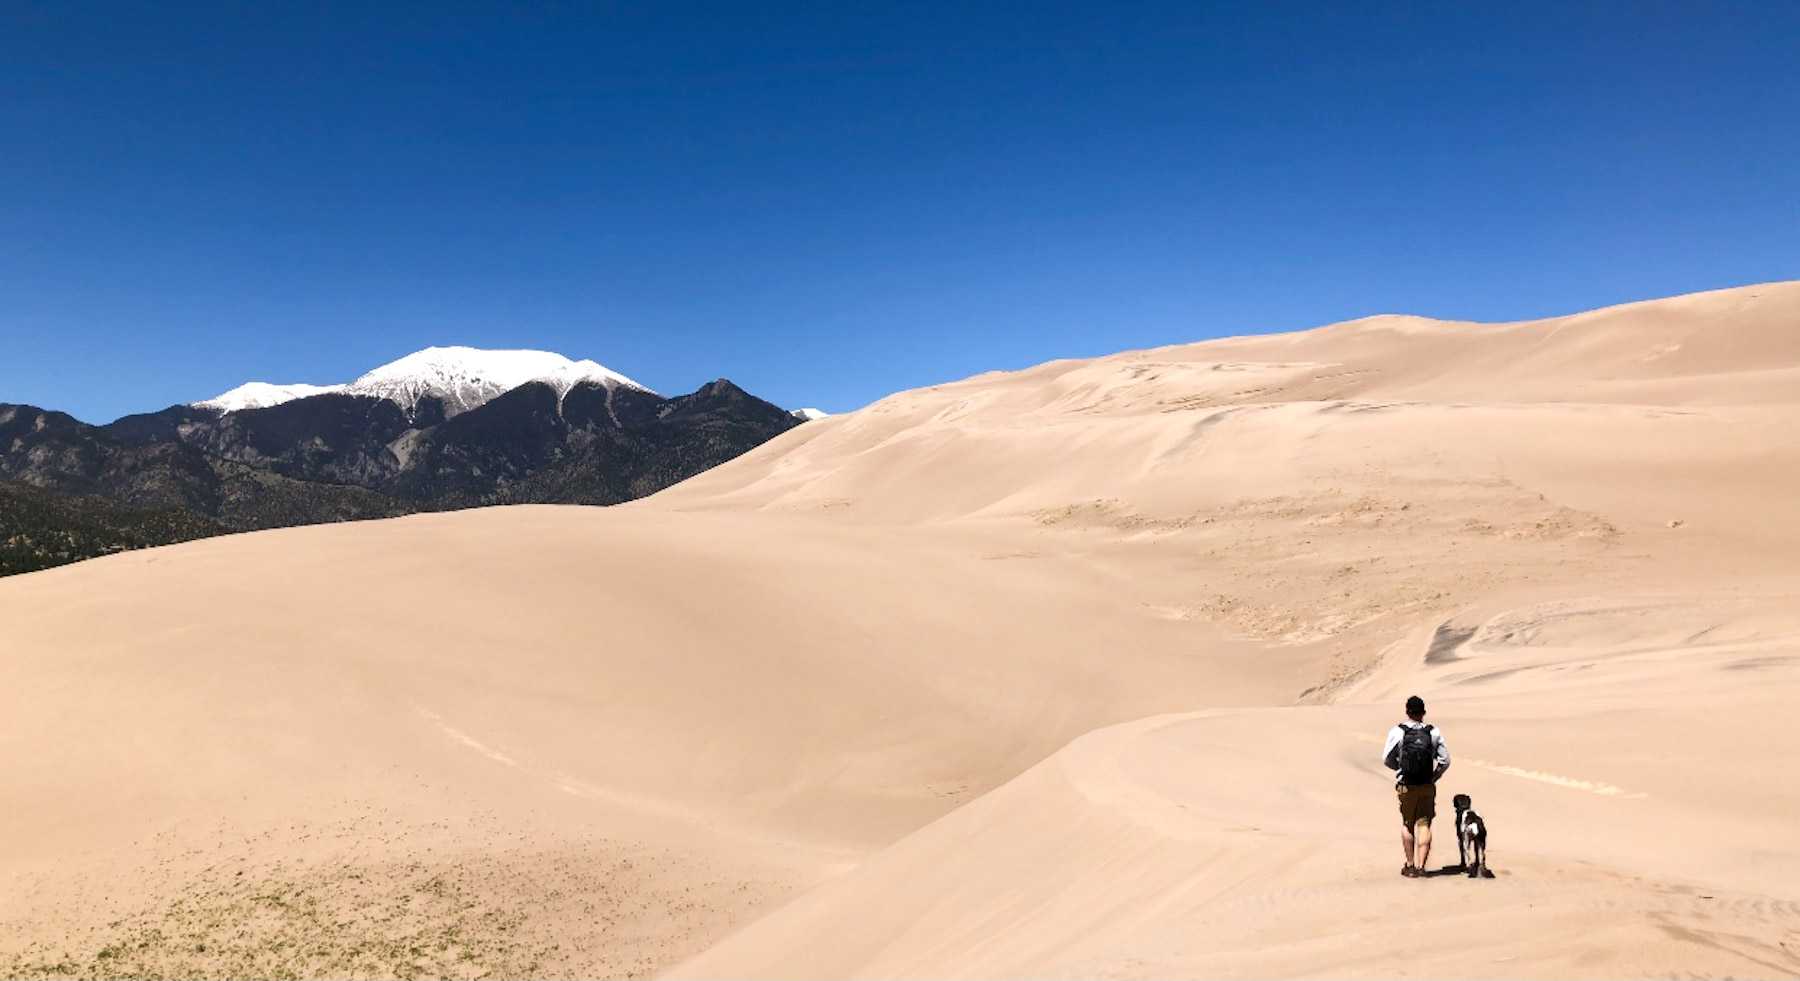 A man and his dog walking in the sand dunes of Great Sand Dunes National Park